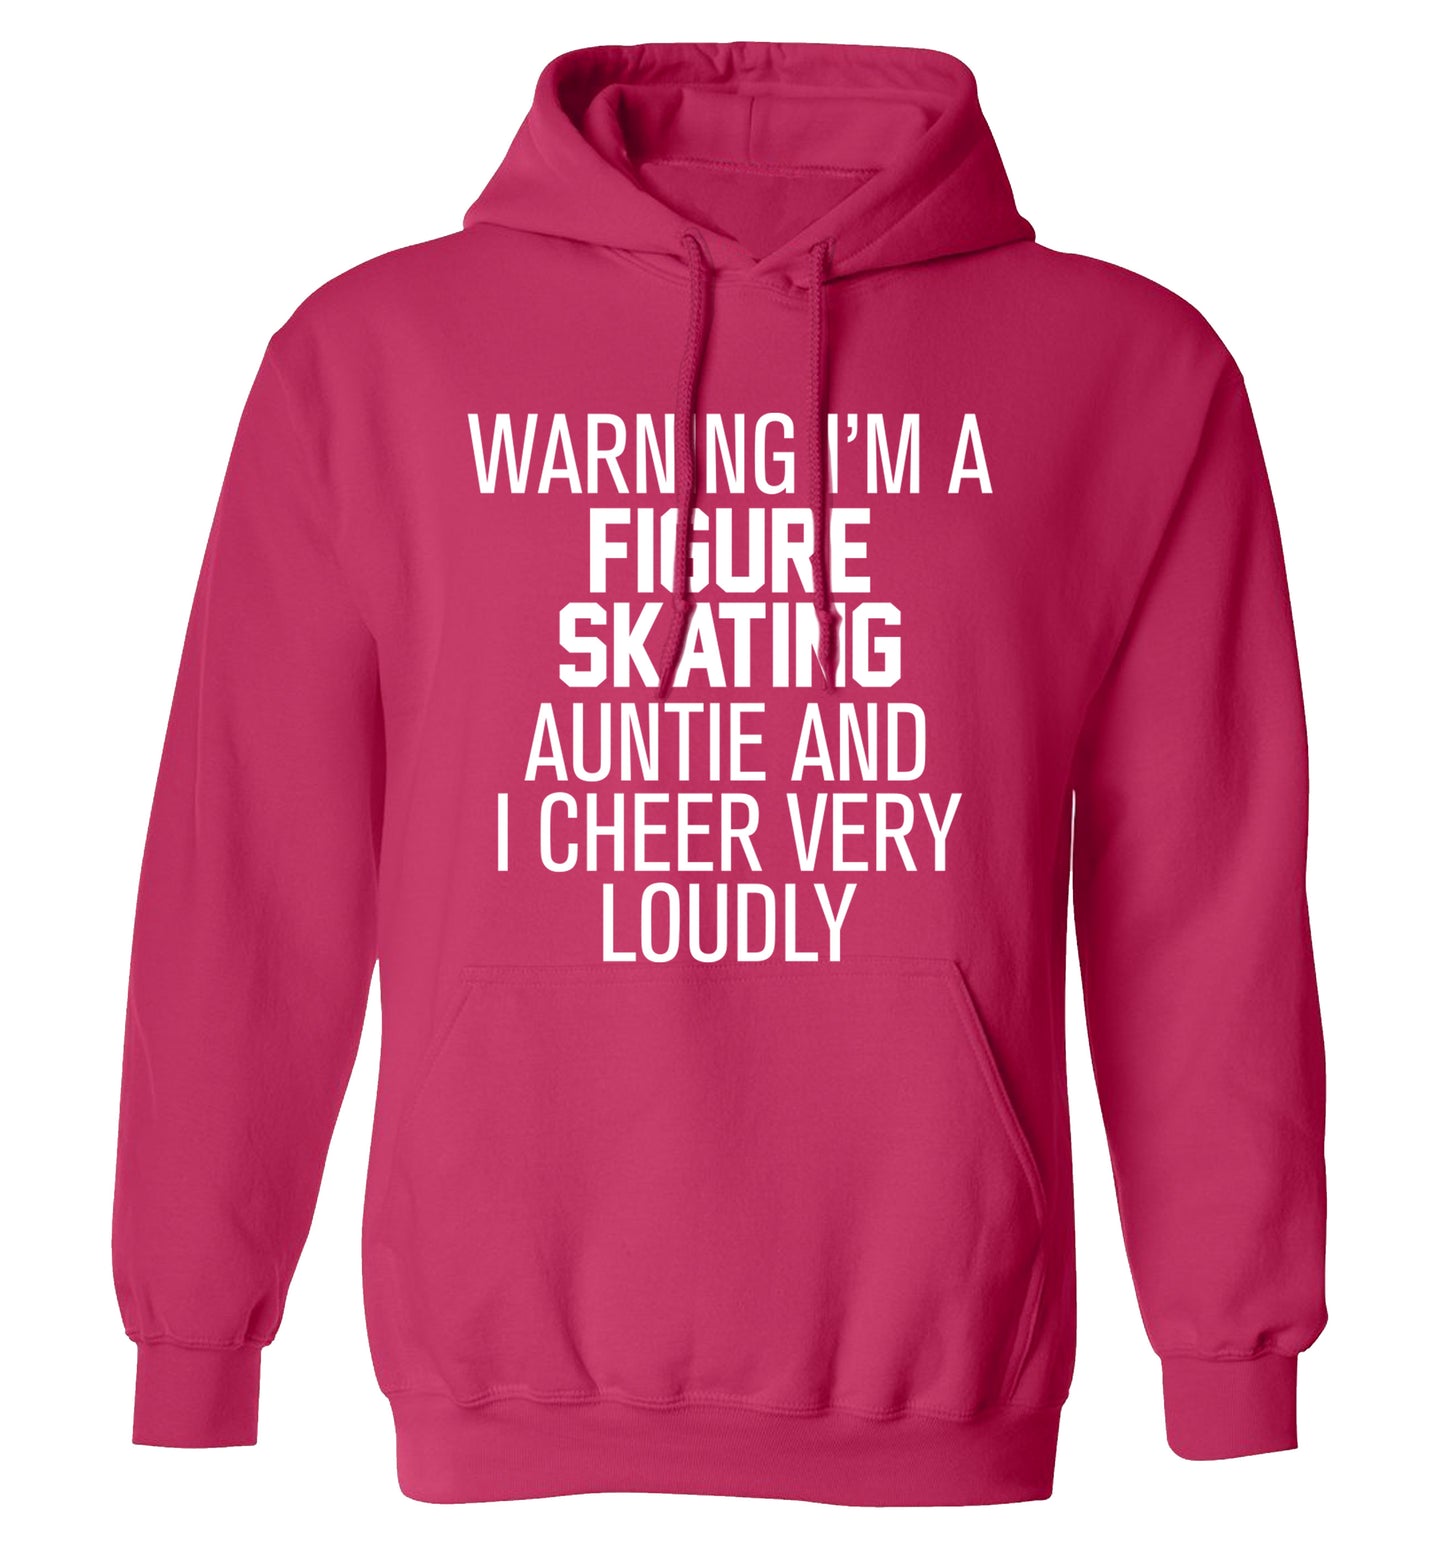 Warning I'm a figure skating auntie and I cheer very loudly adults unisexpink hoodie 2XL